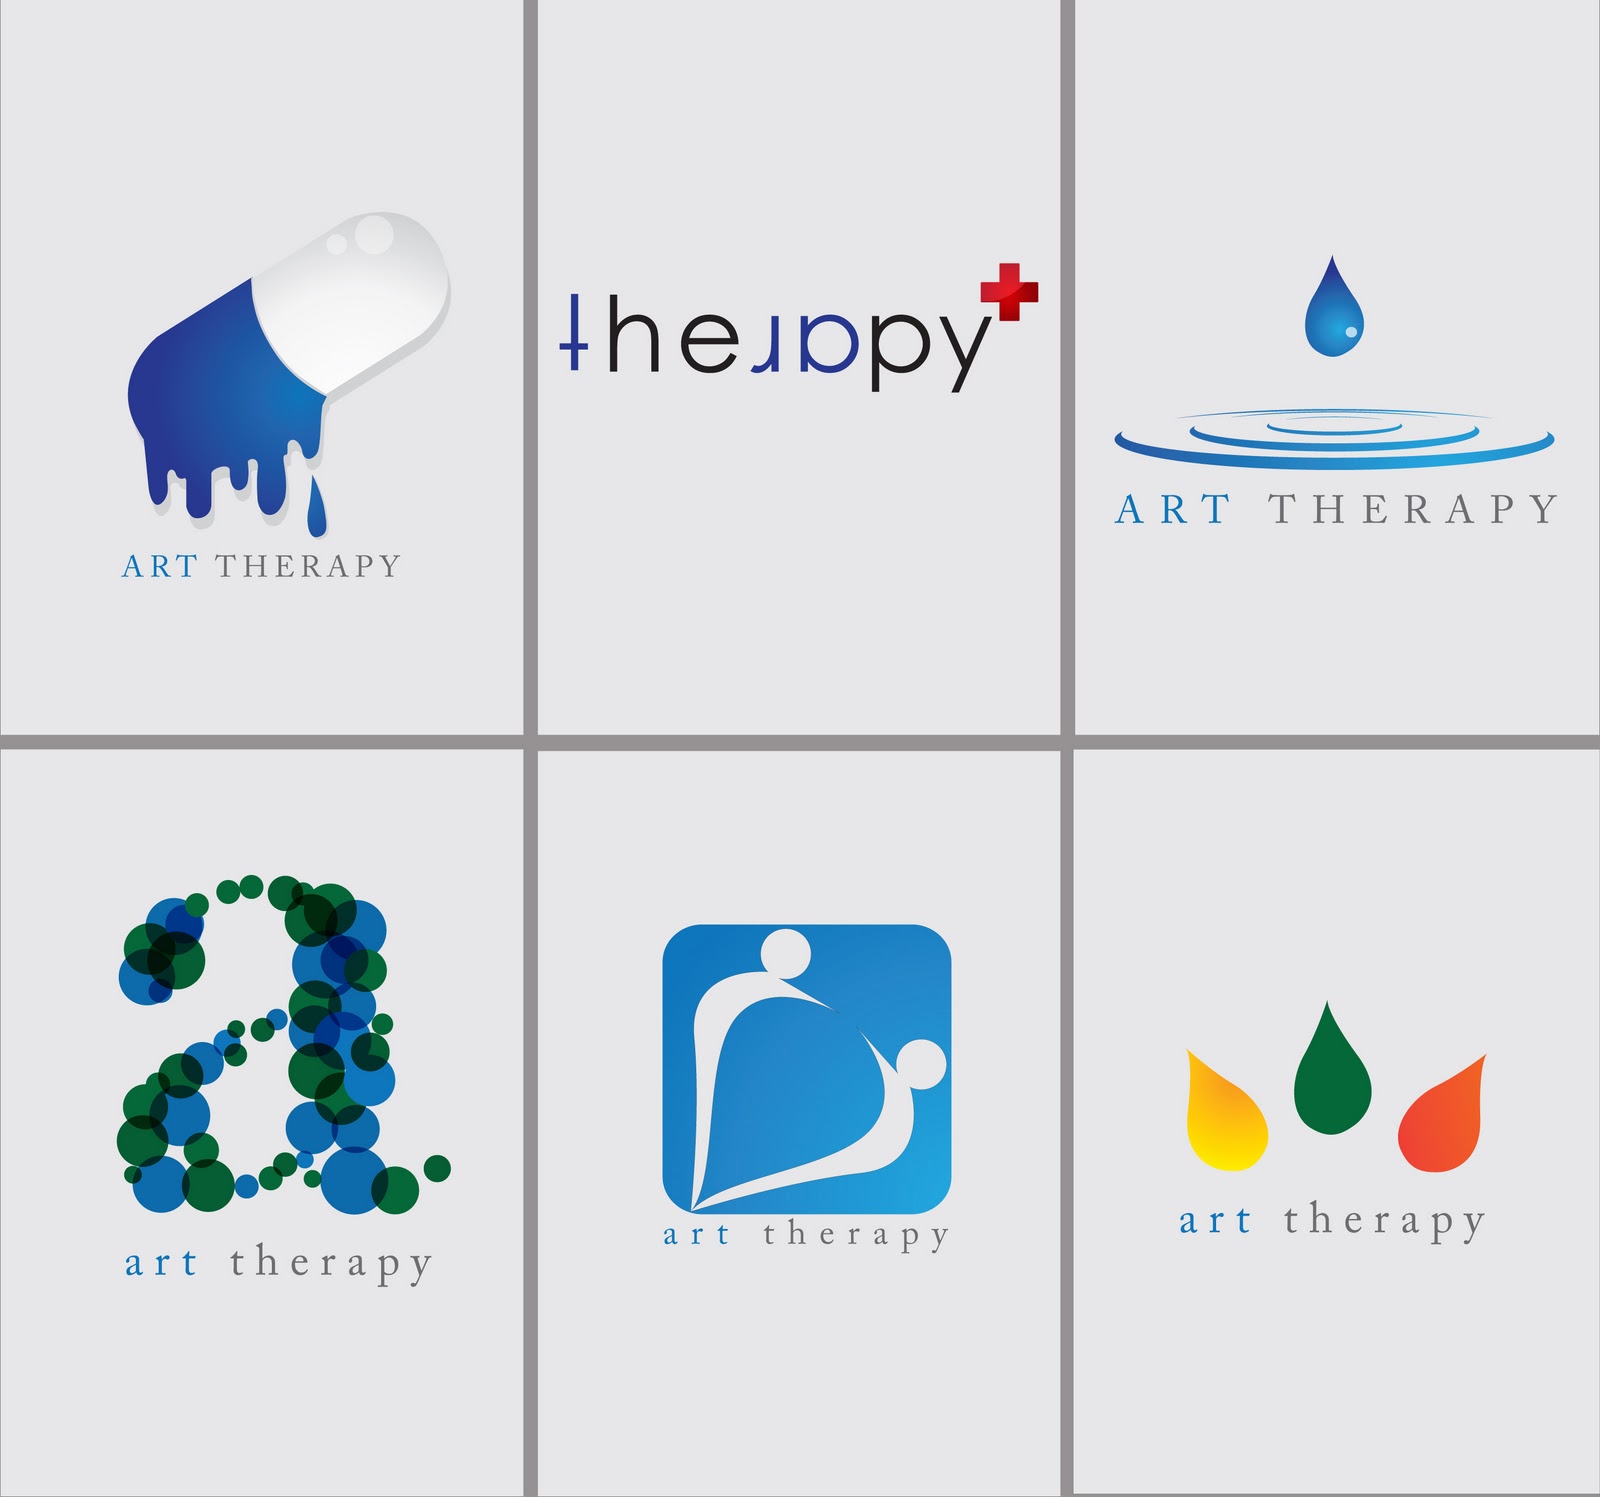 I Am Thinkking Art Therapy Logo Design And Ideas